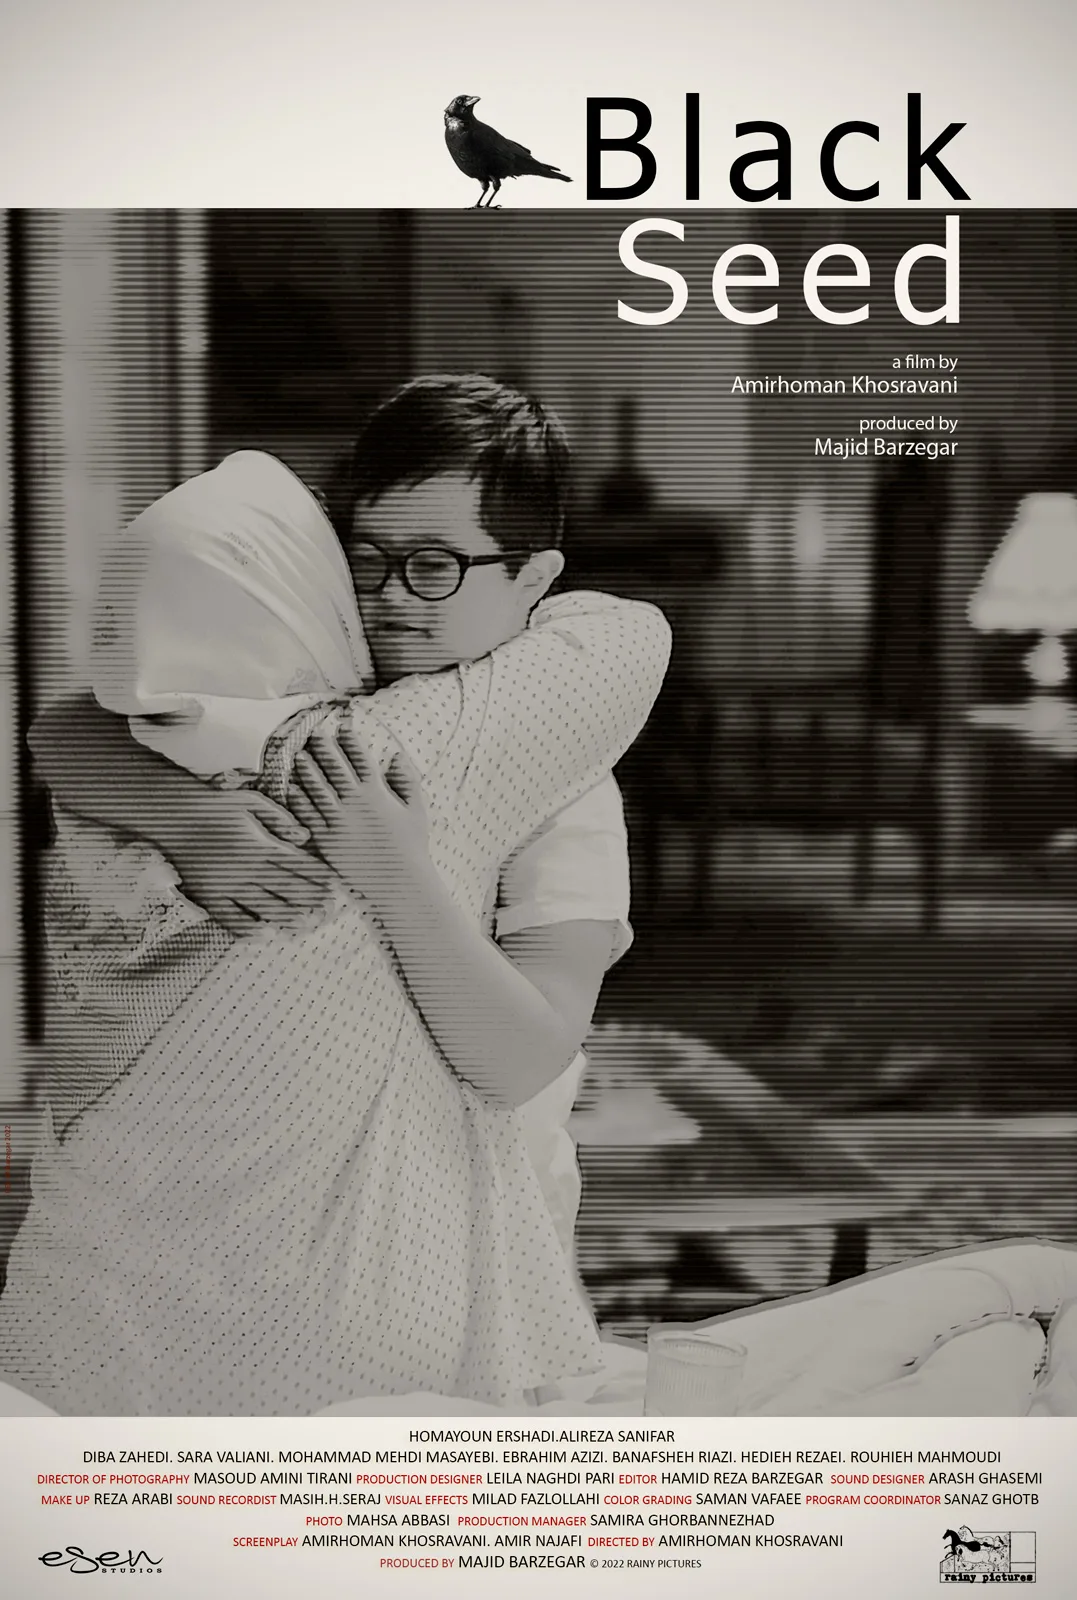 Poster of the short film "Black Seed"